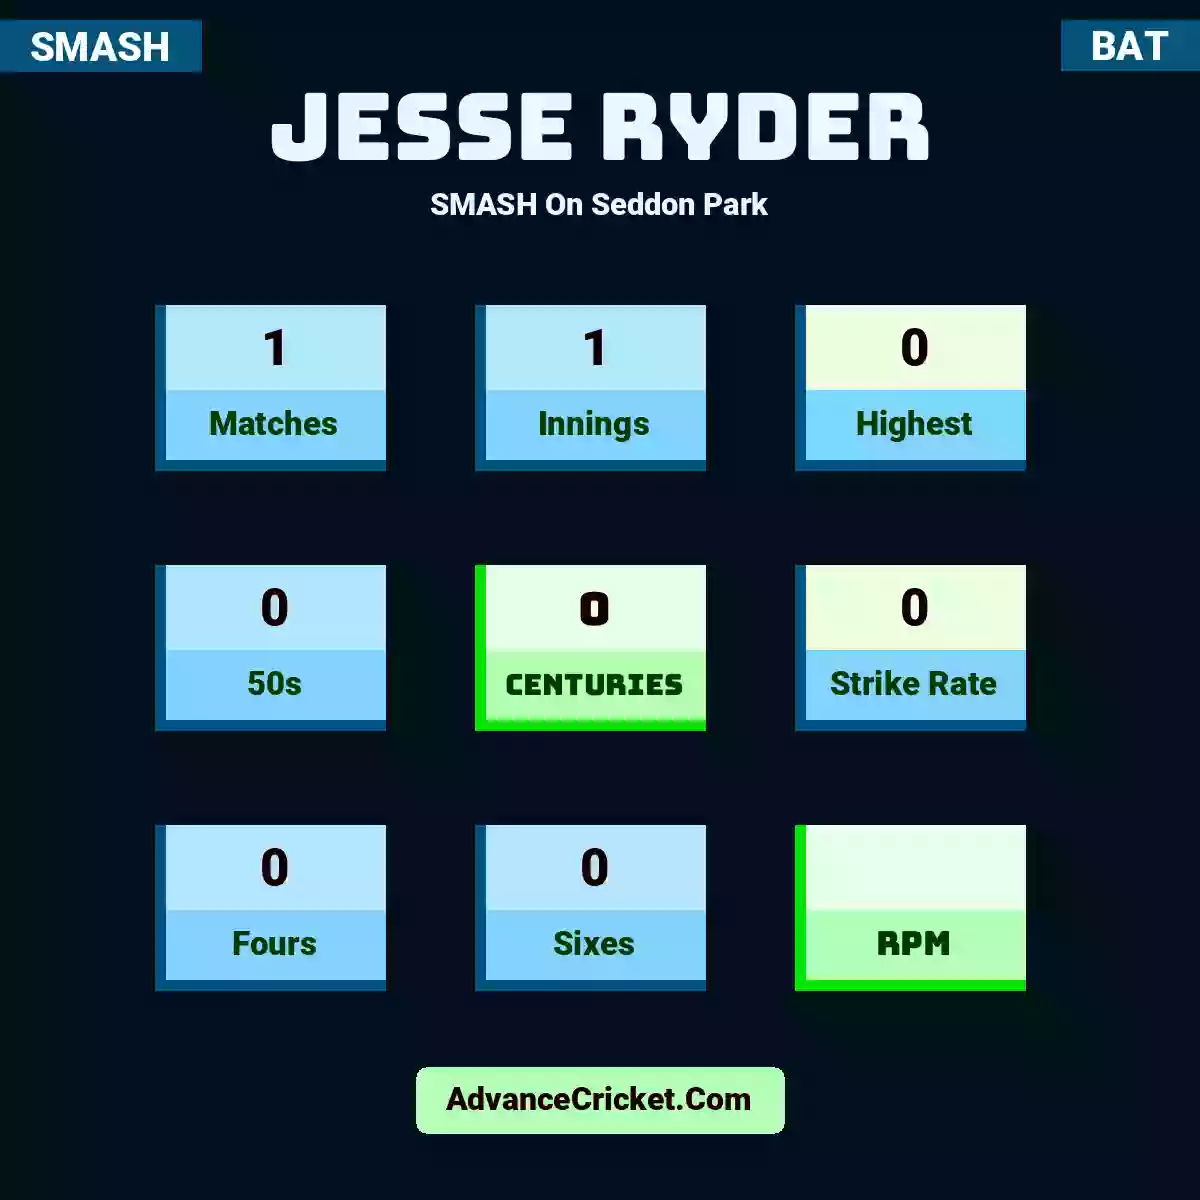 Jesse Ryder SMASH  On Seddon Park, Jesse Ryder played 1 matches, scored 0 runs as highest, 0 half-centuries, and 0 centuries, with a strike rate of 0. J.Ryder hit 0 fours and 0 sixes.